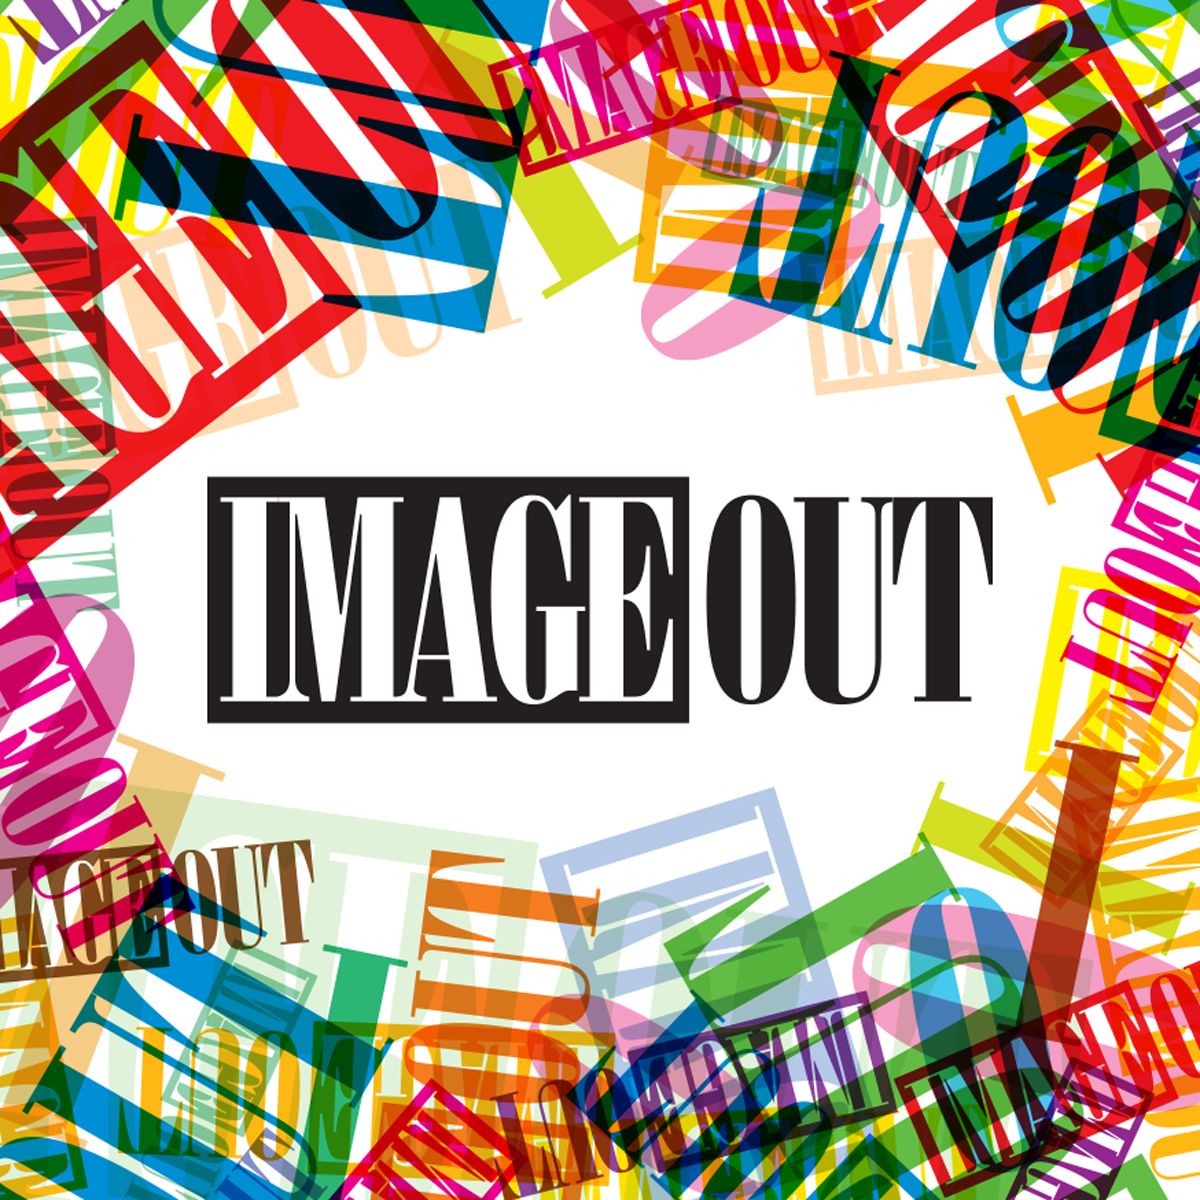 ImageOut